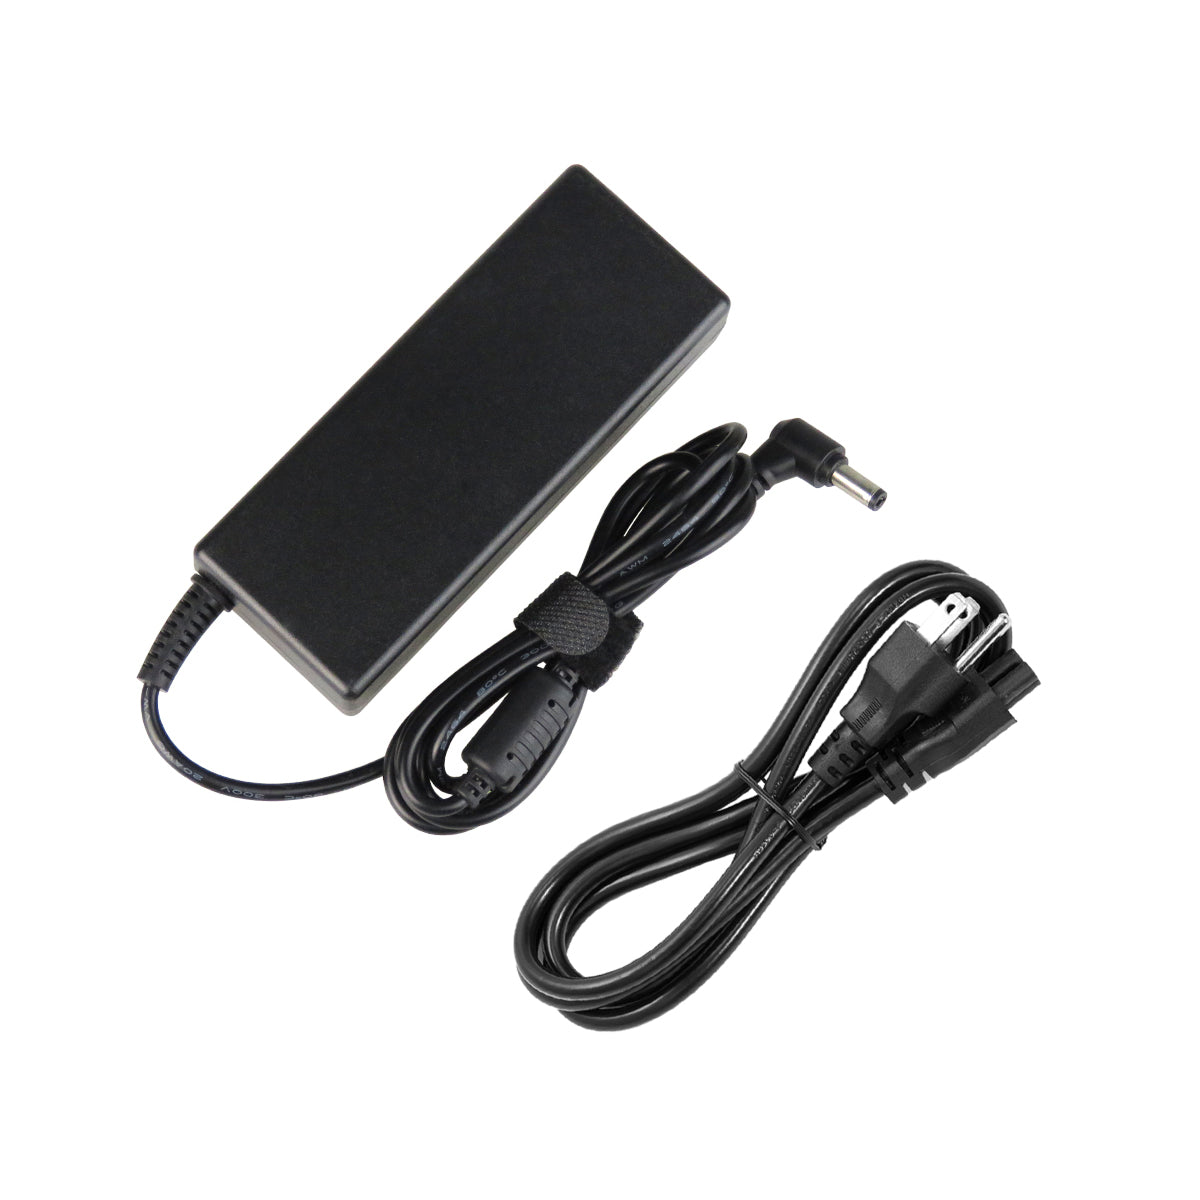 AC Adapter Charger for ASUS A85VS Notebook.